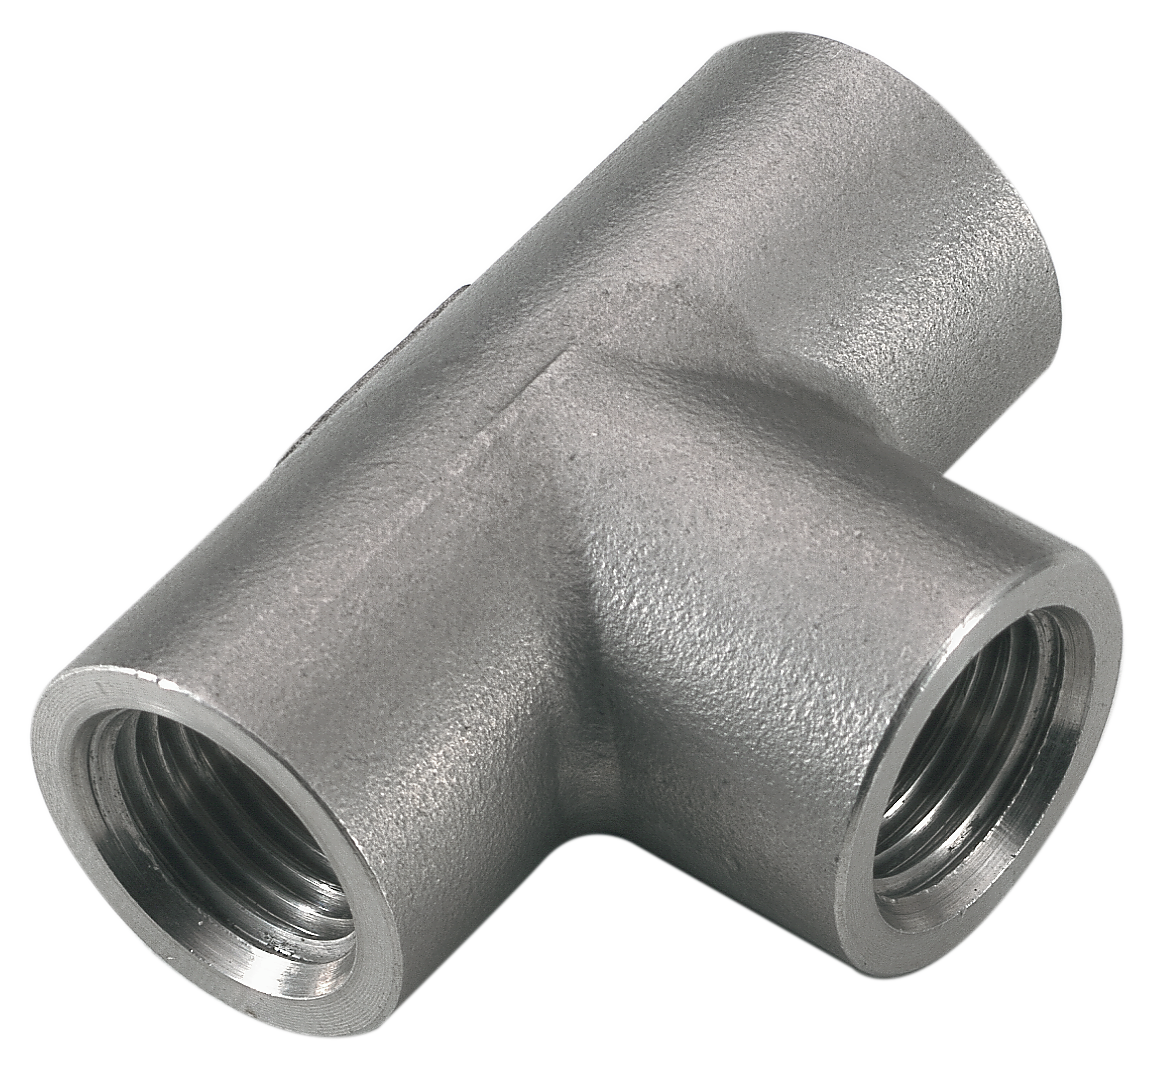 T equal female cylindrical stainless steel AISI 316Ti 3/8 Standard fittings in stainless steel